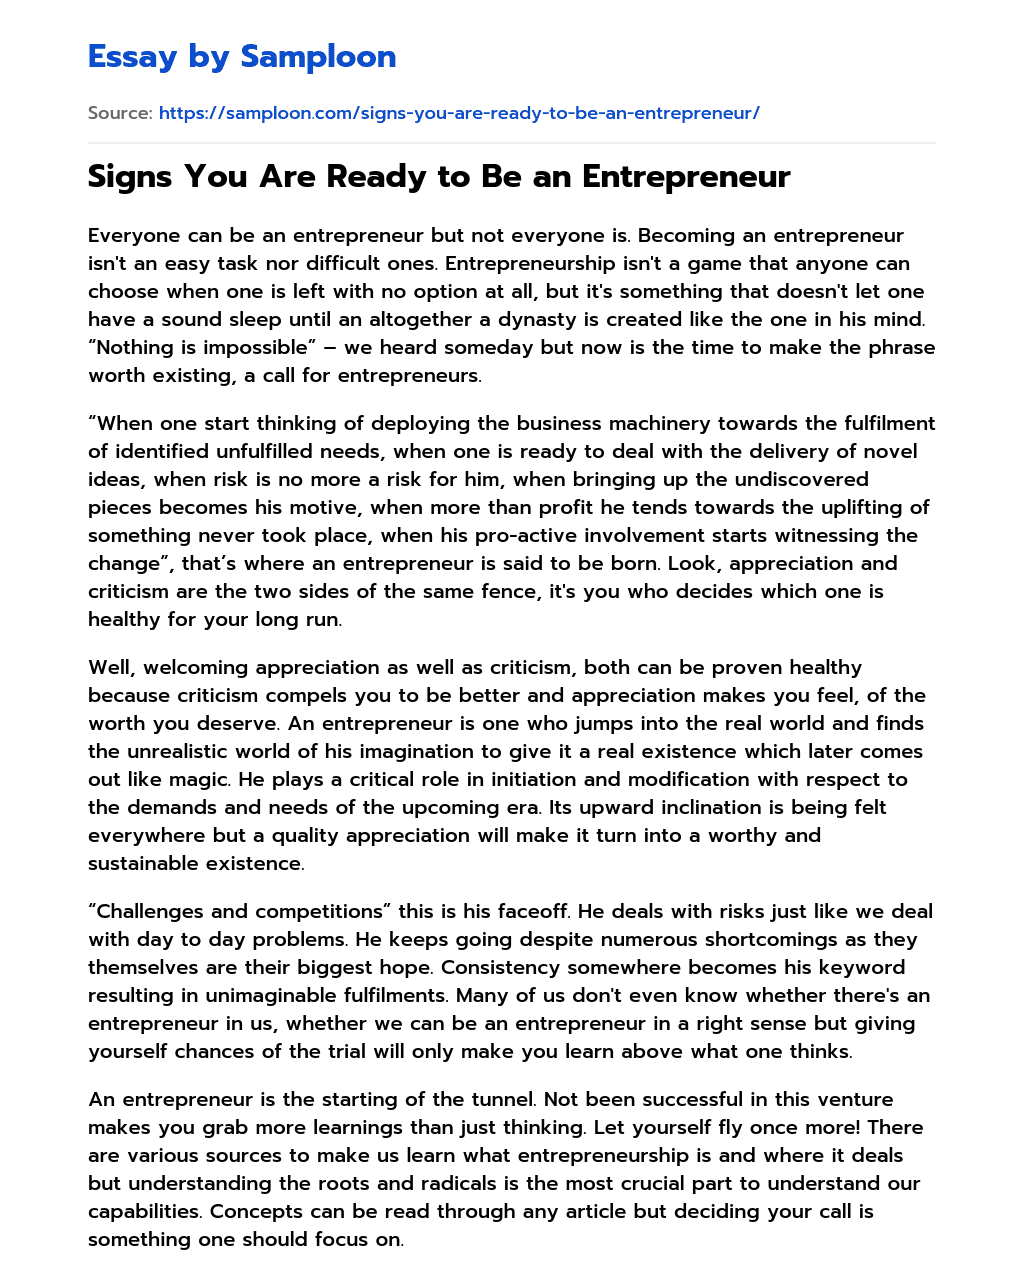 Signs You Are Ready to Be an Entrepreneur essay